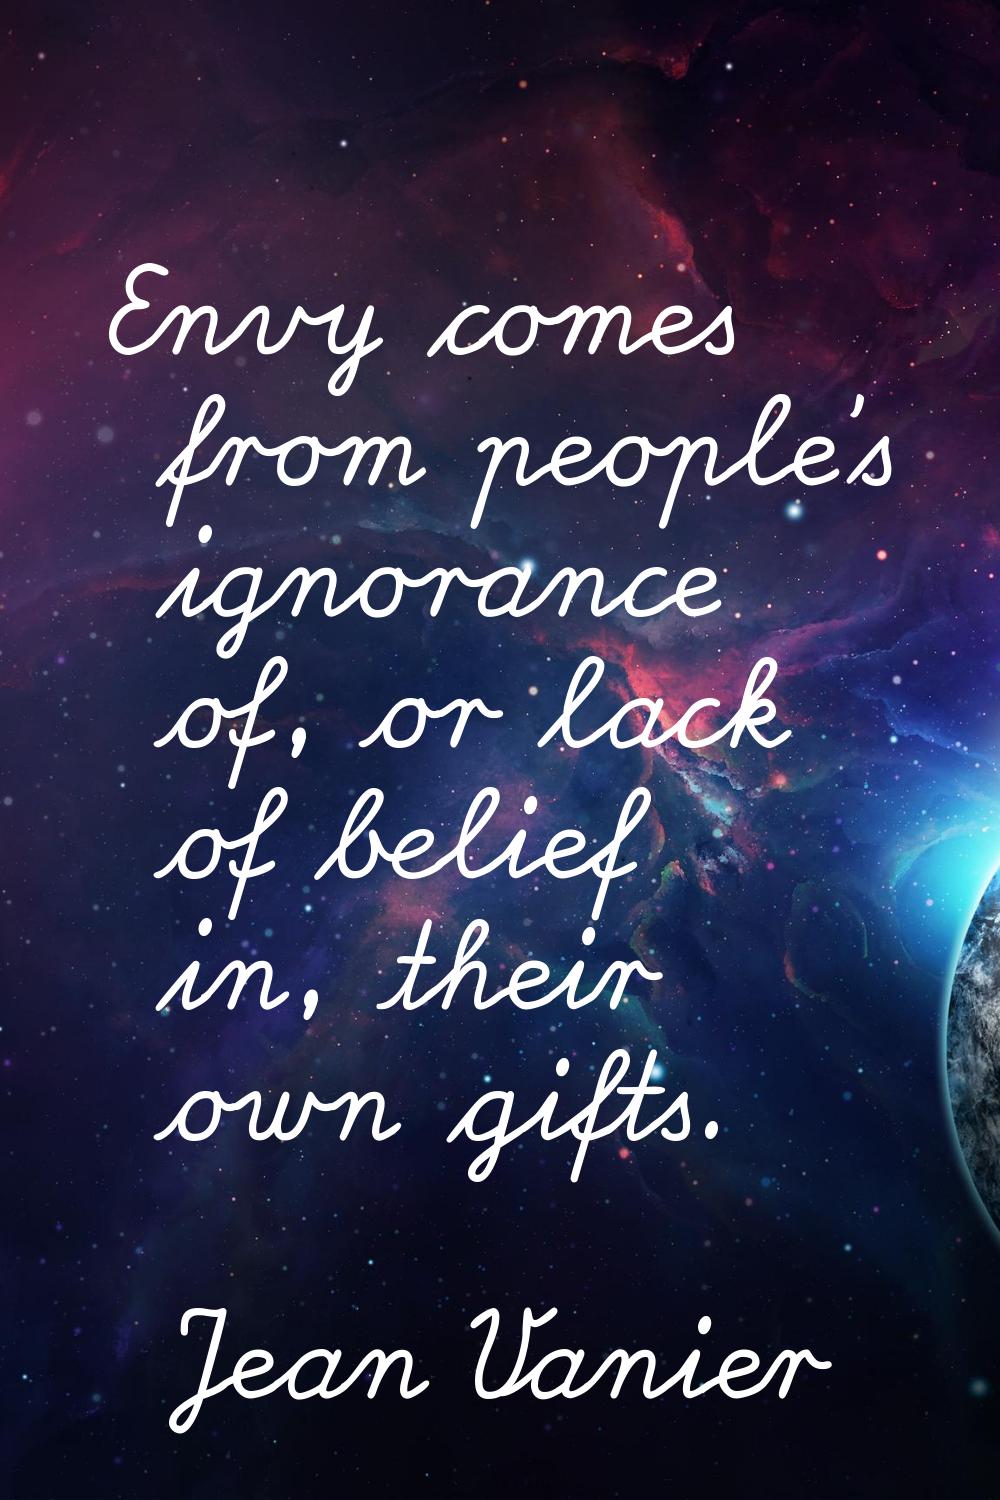 Envy comes from people's ignorance of, or lack of belief in, their own gifts.